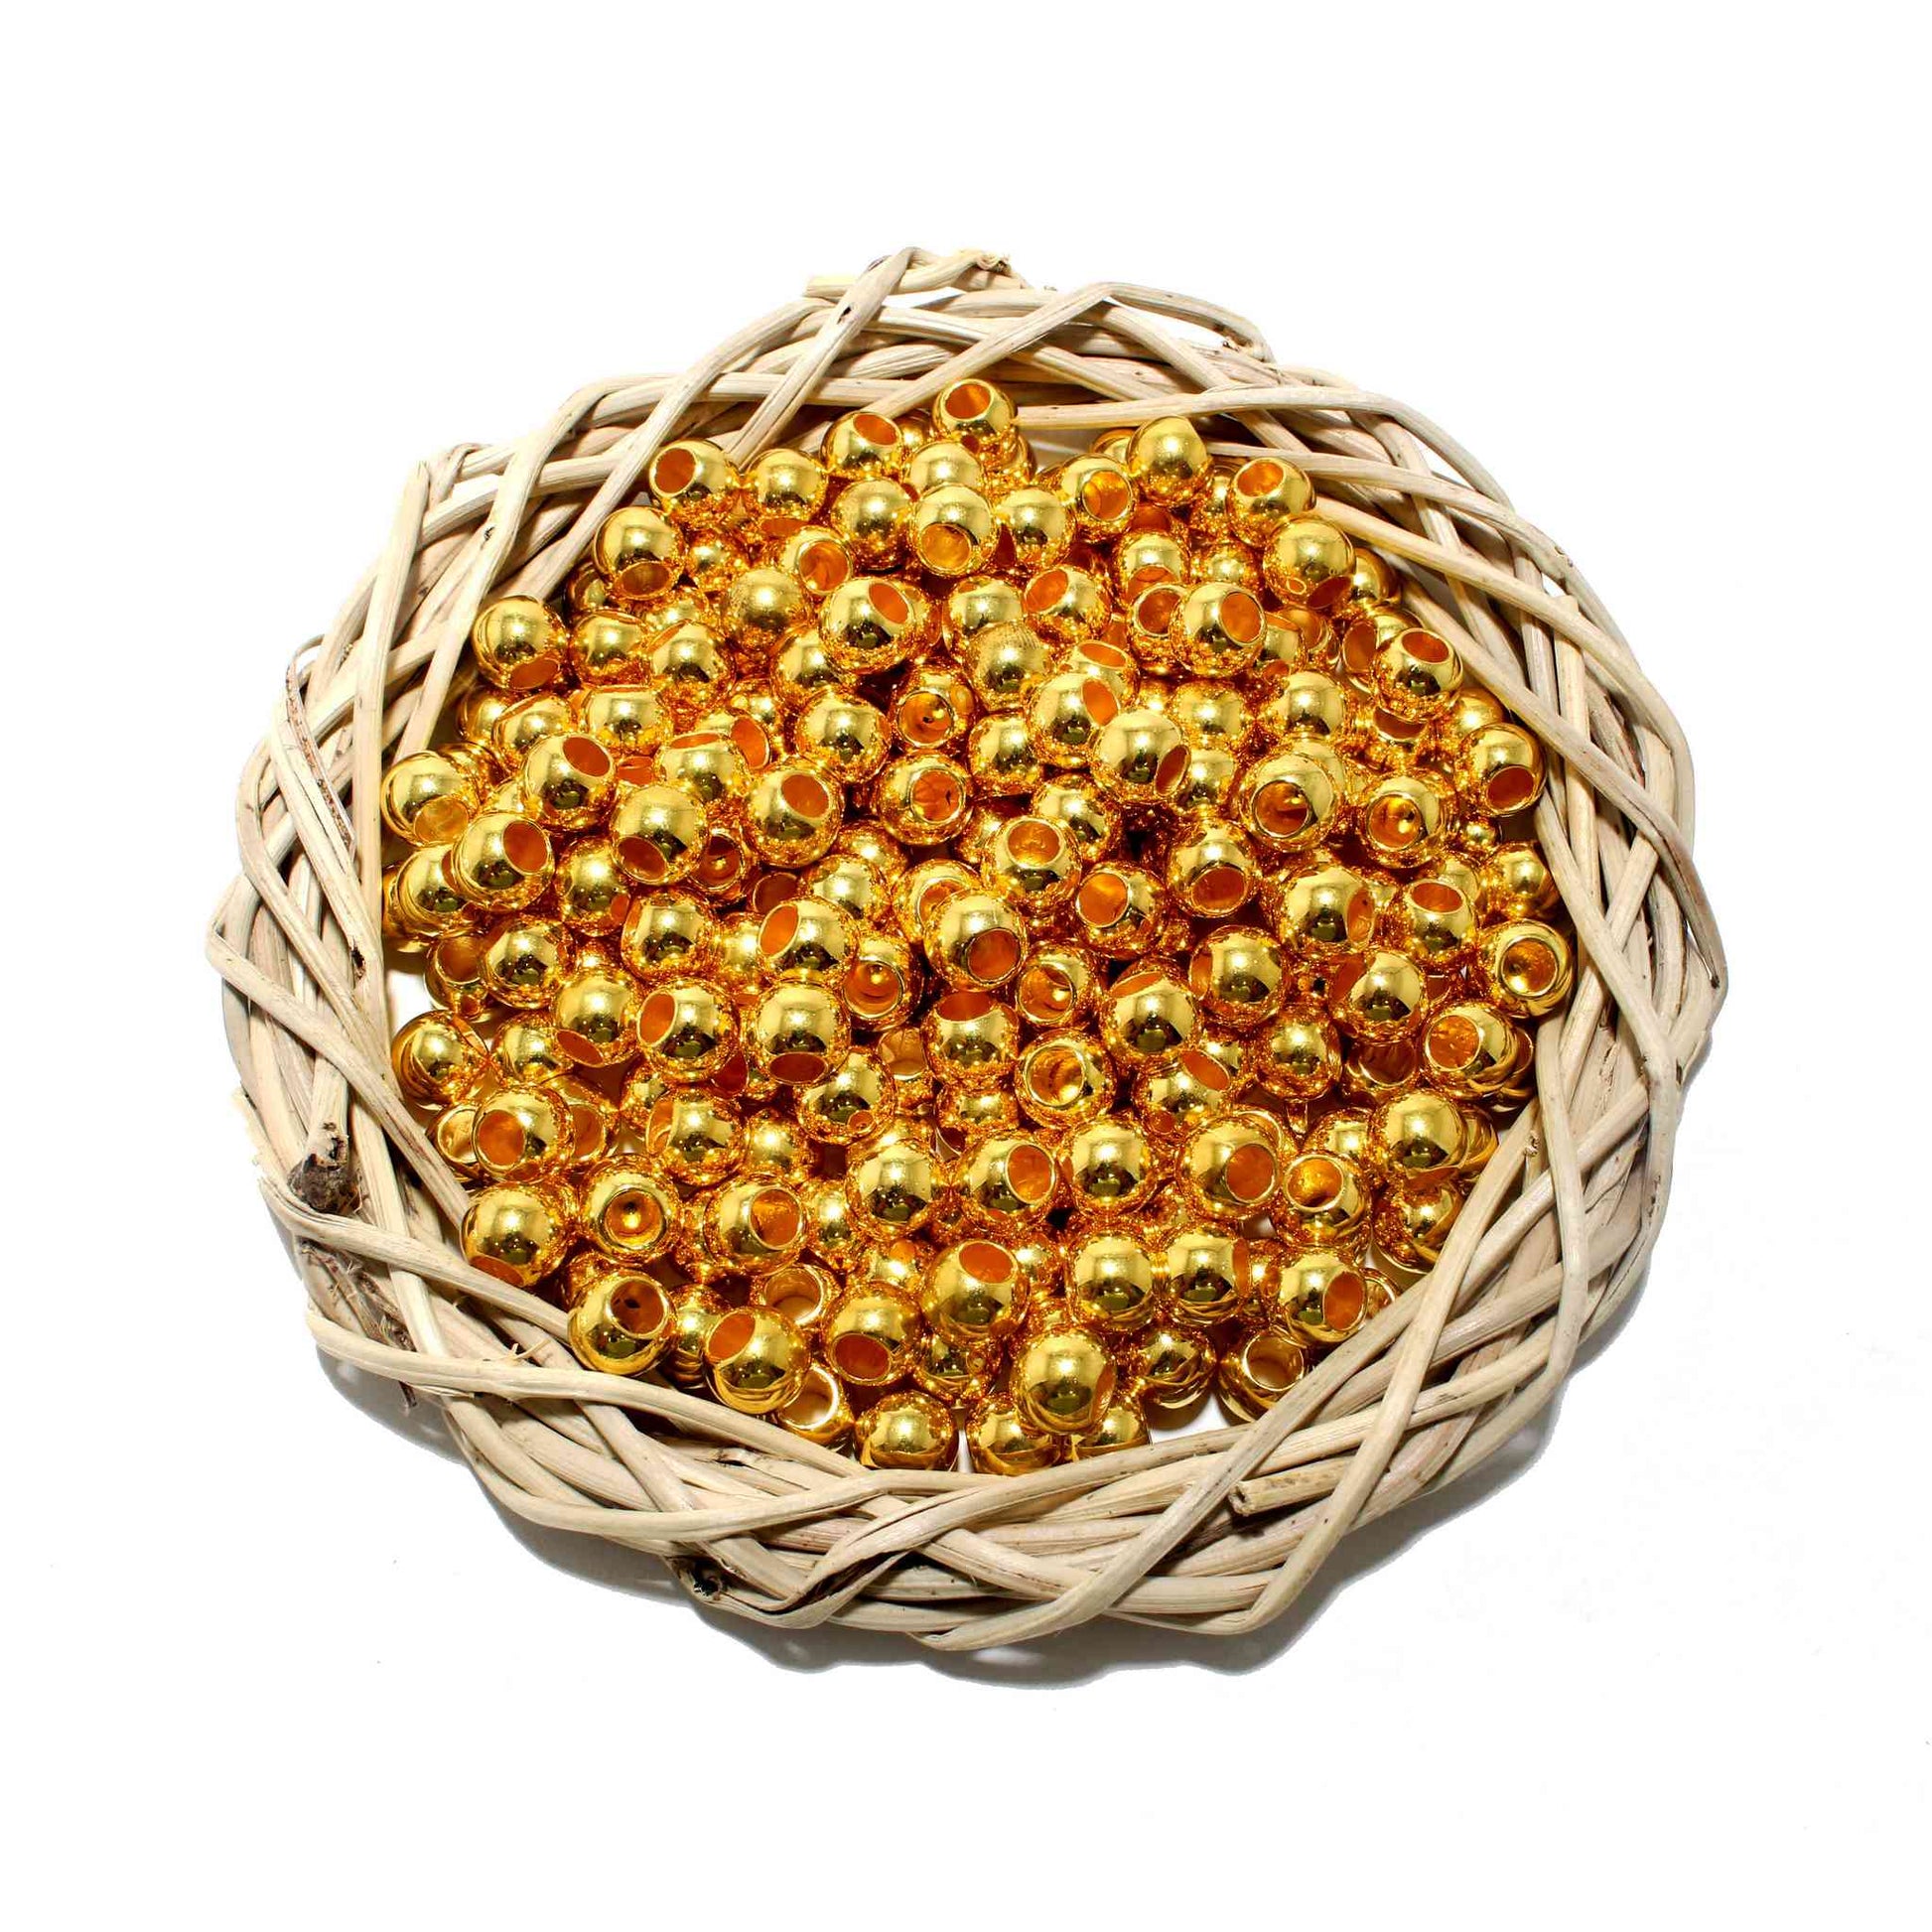 Indian Petals Premium quality Ball Beads for DIY Craft, Trousseau Packing or Decoration - Design 629, Size - 10mm - Indian Petals